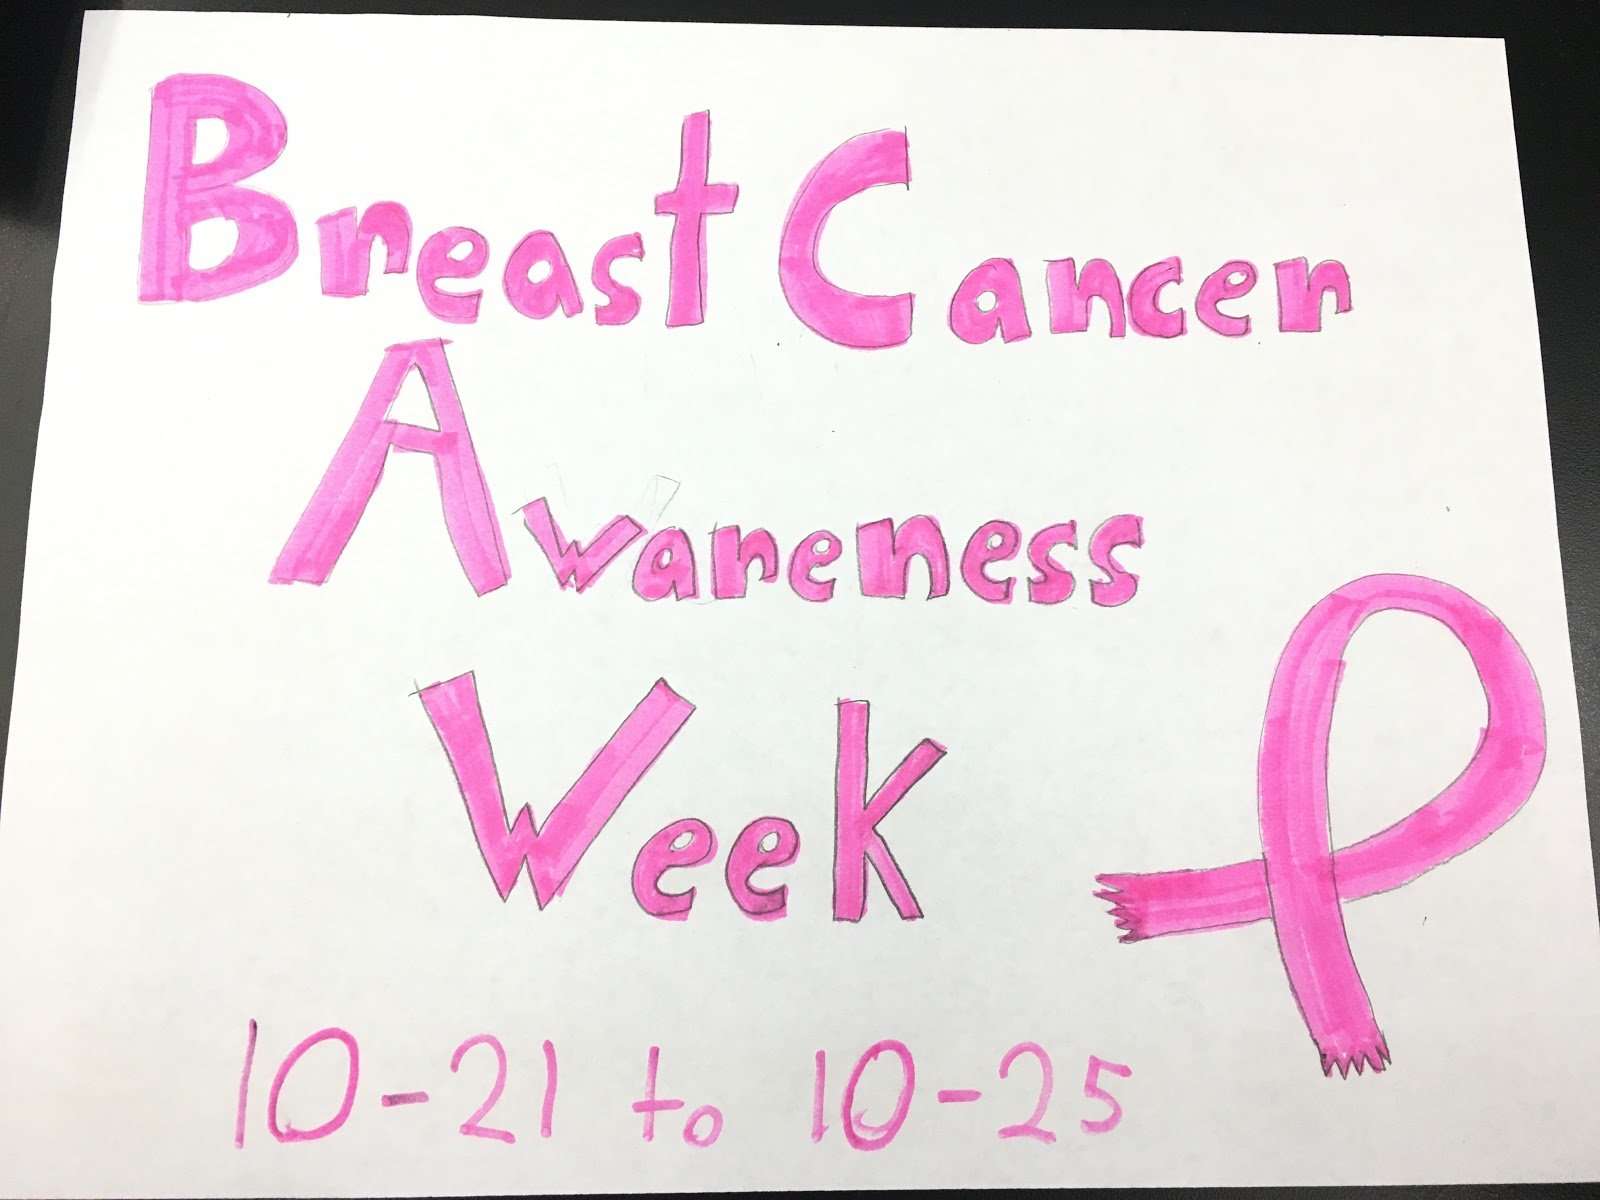 Are you Aware of Breast Cancer Awareness Week?